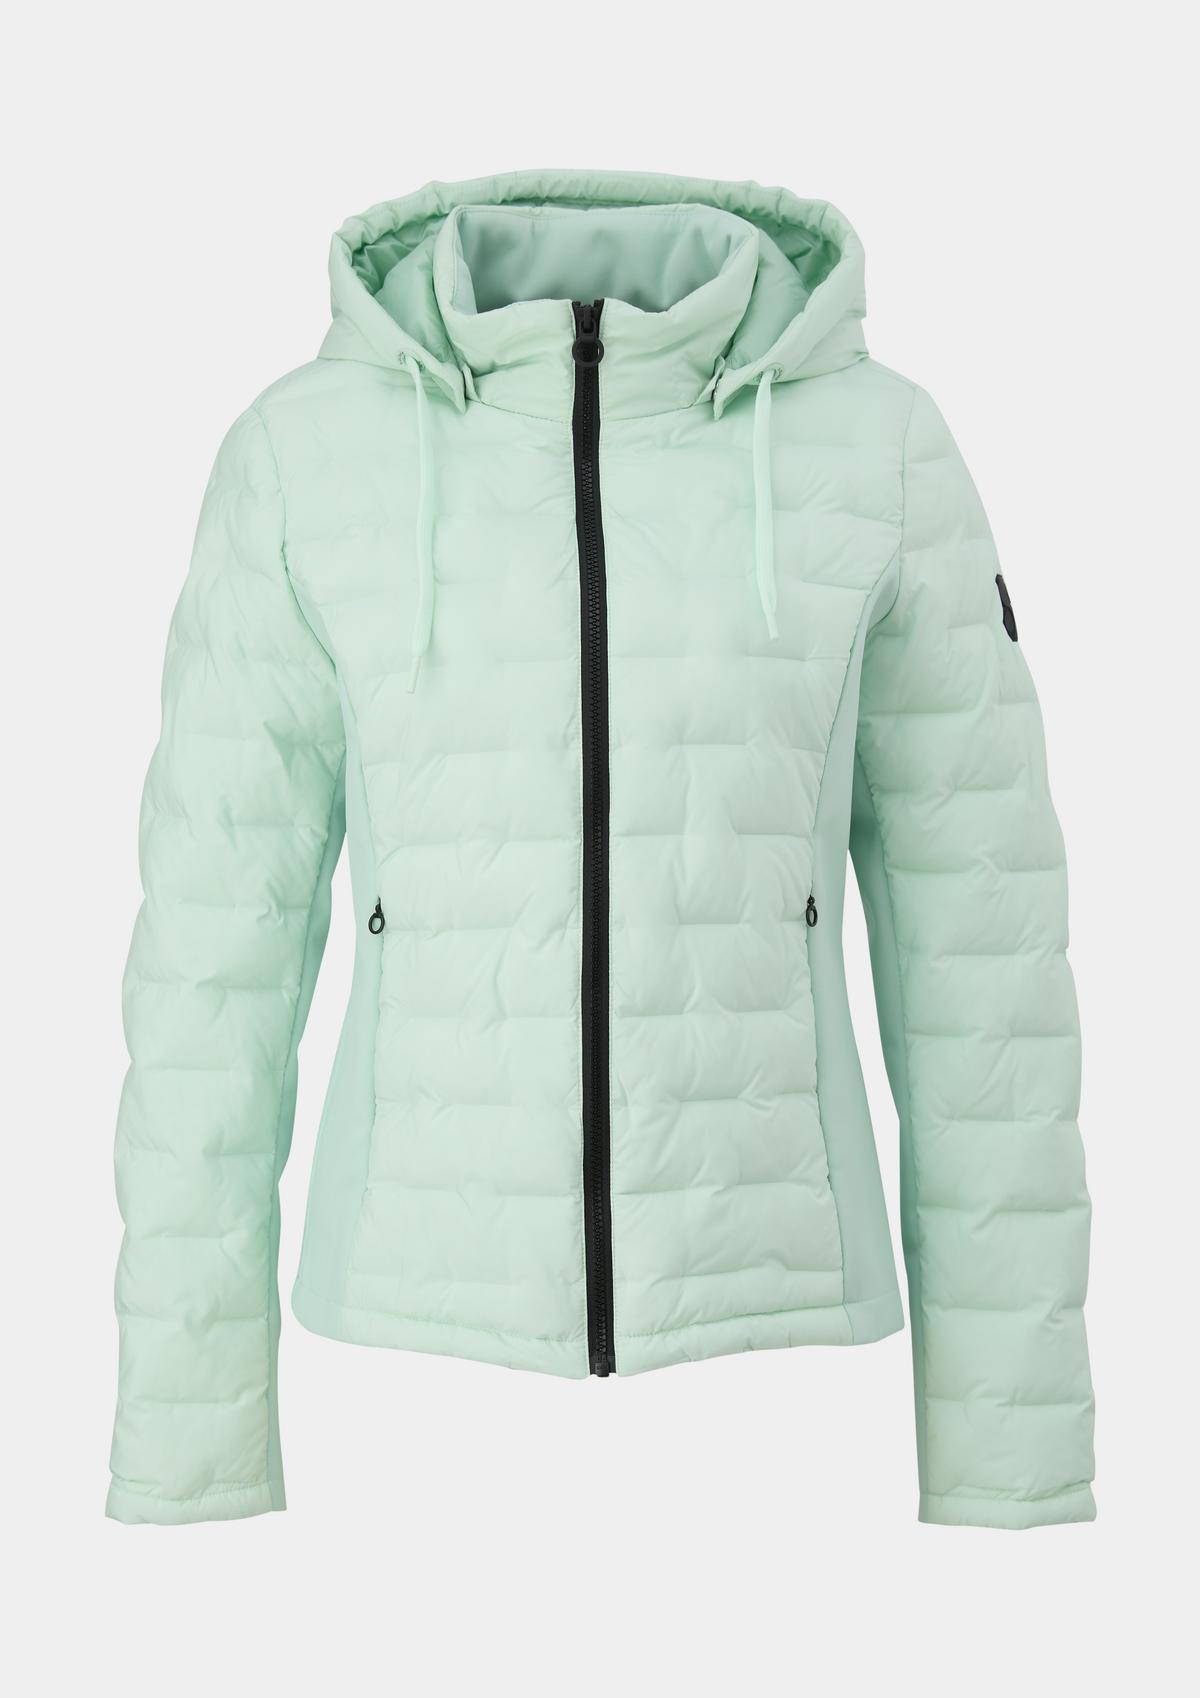 Padded outdoor jacket offwhite in - of a materials mix